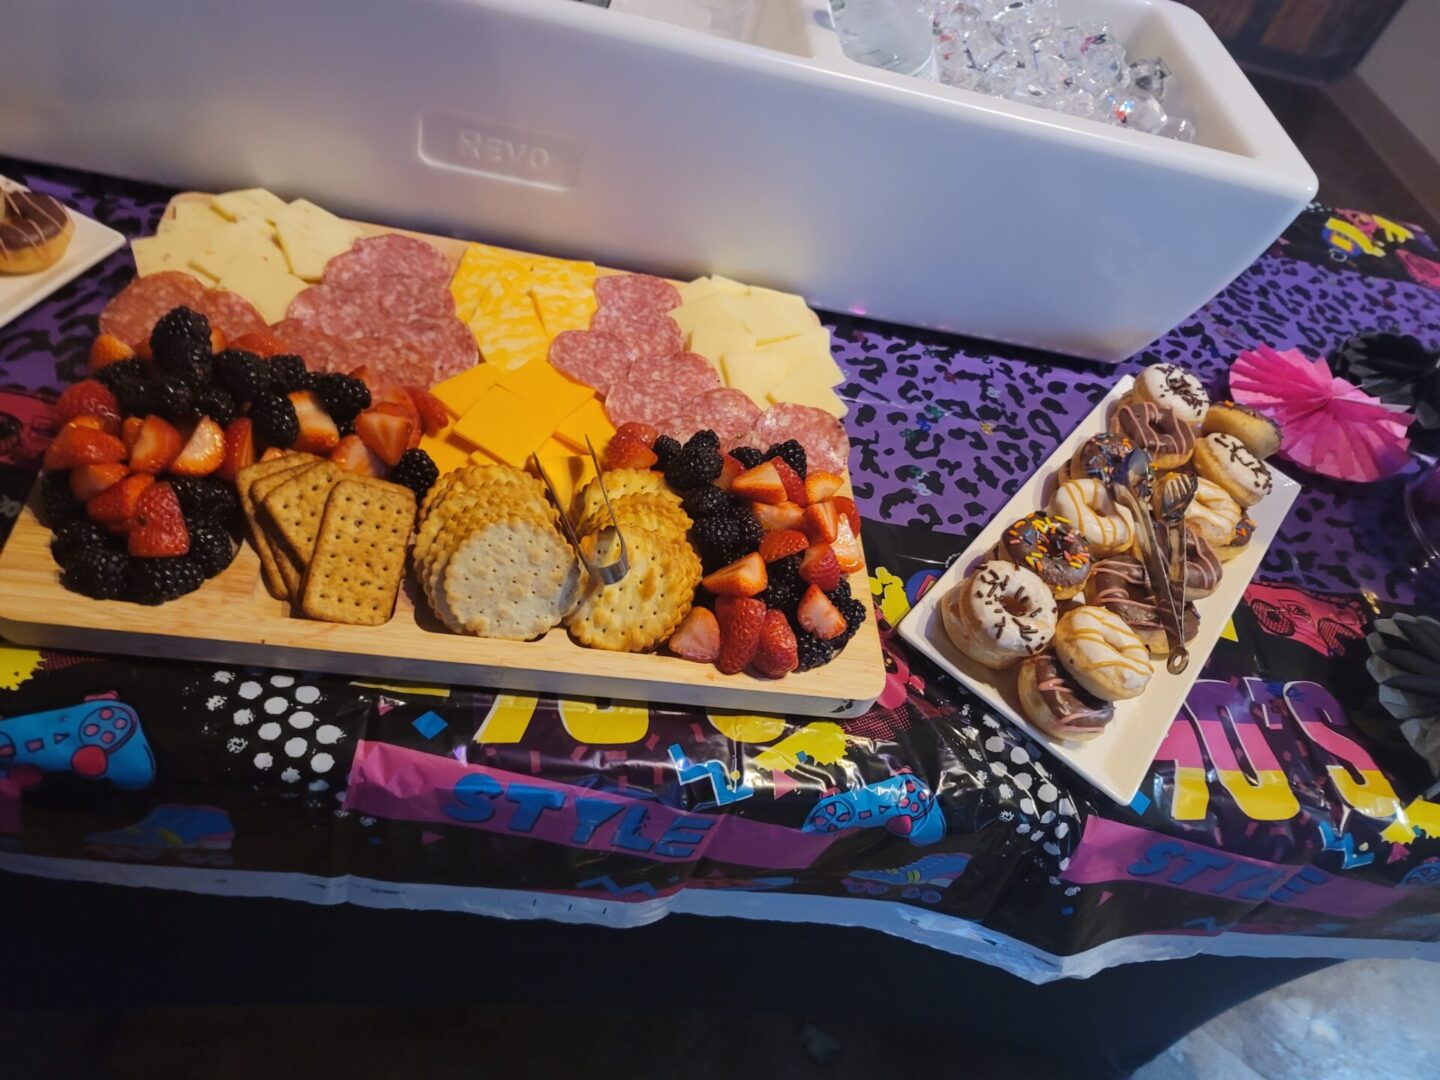 A table with two trays of food on it